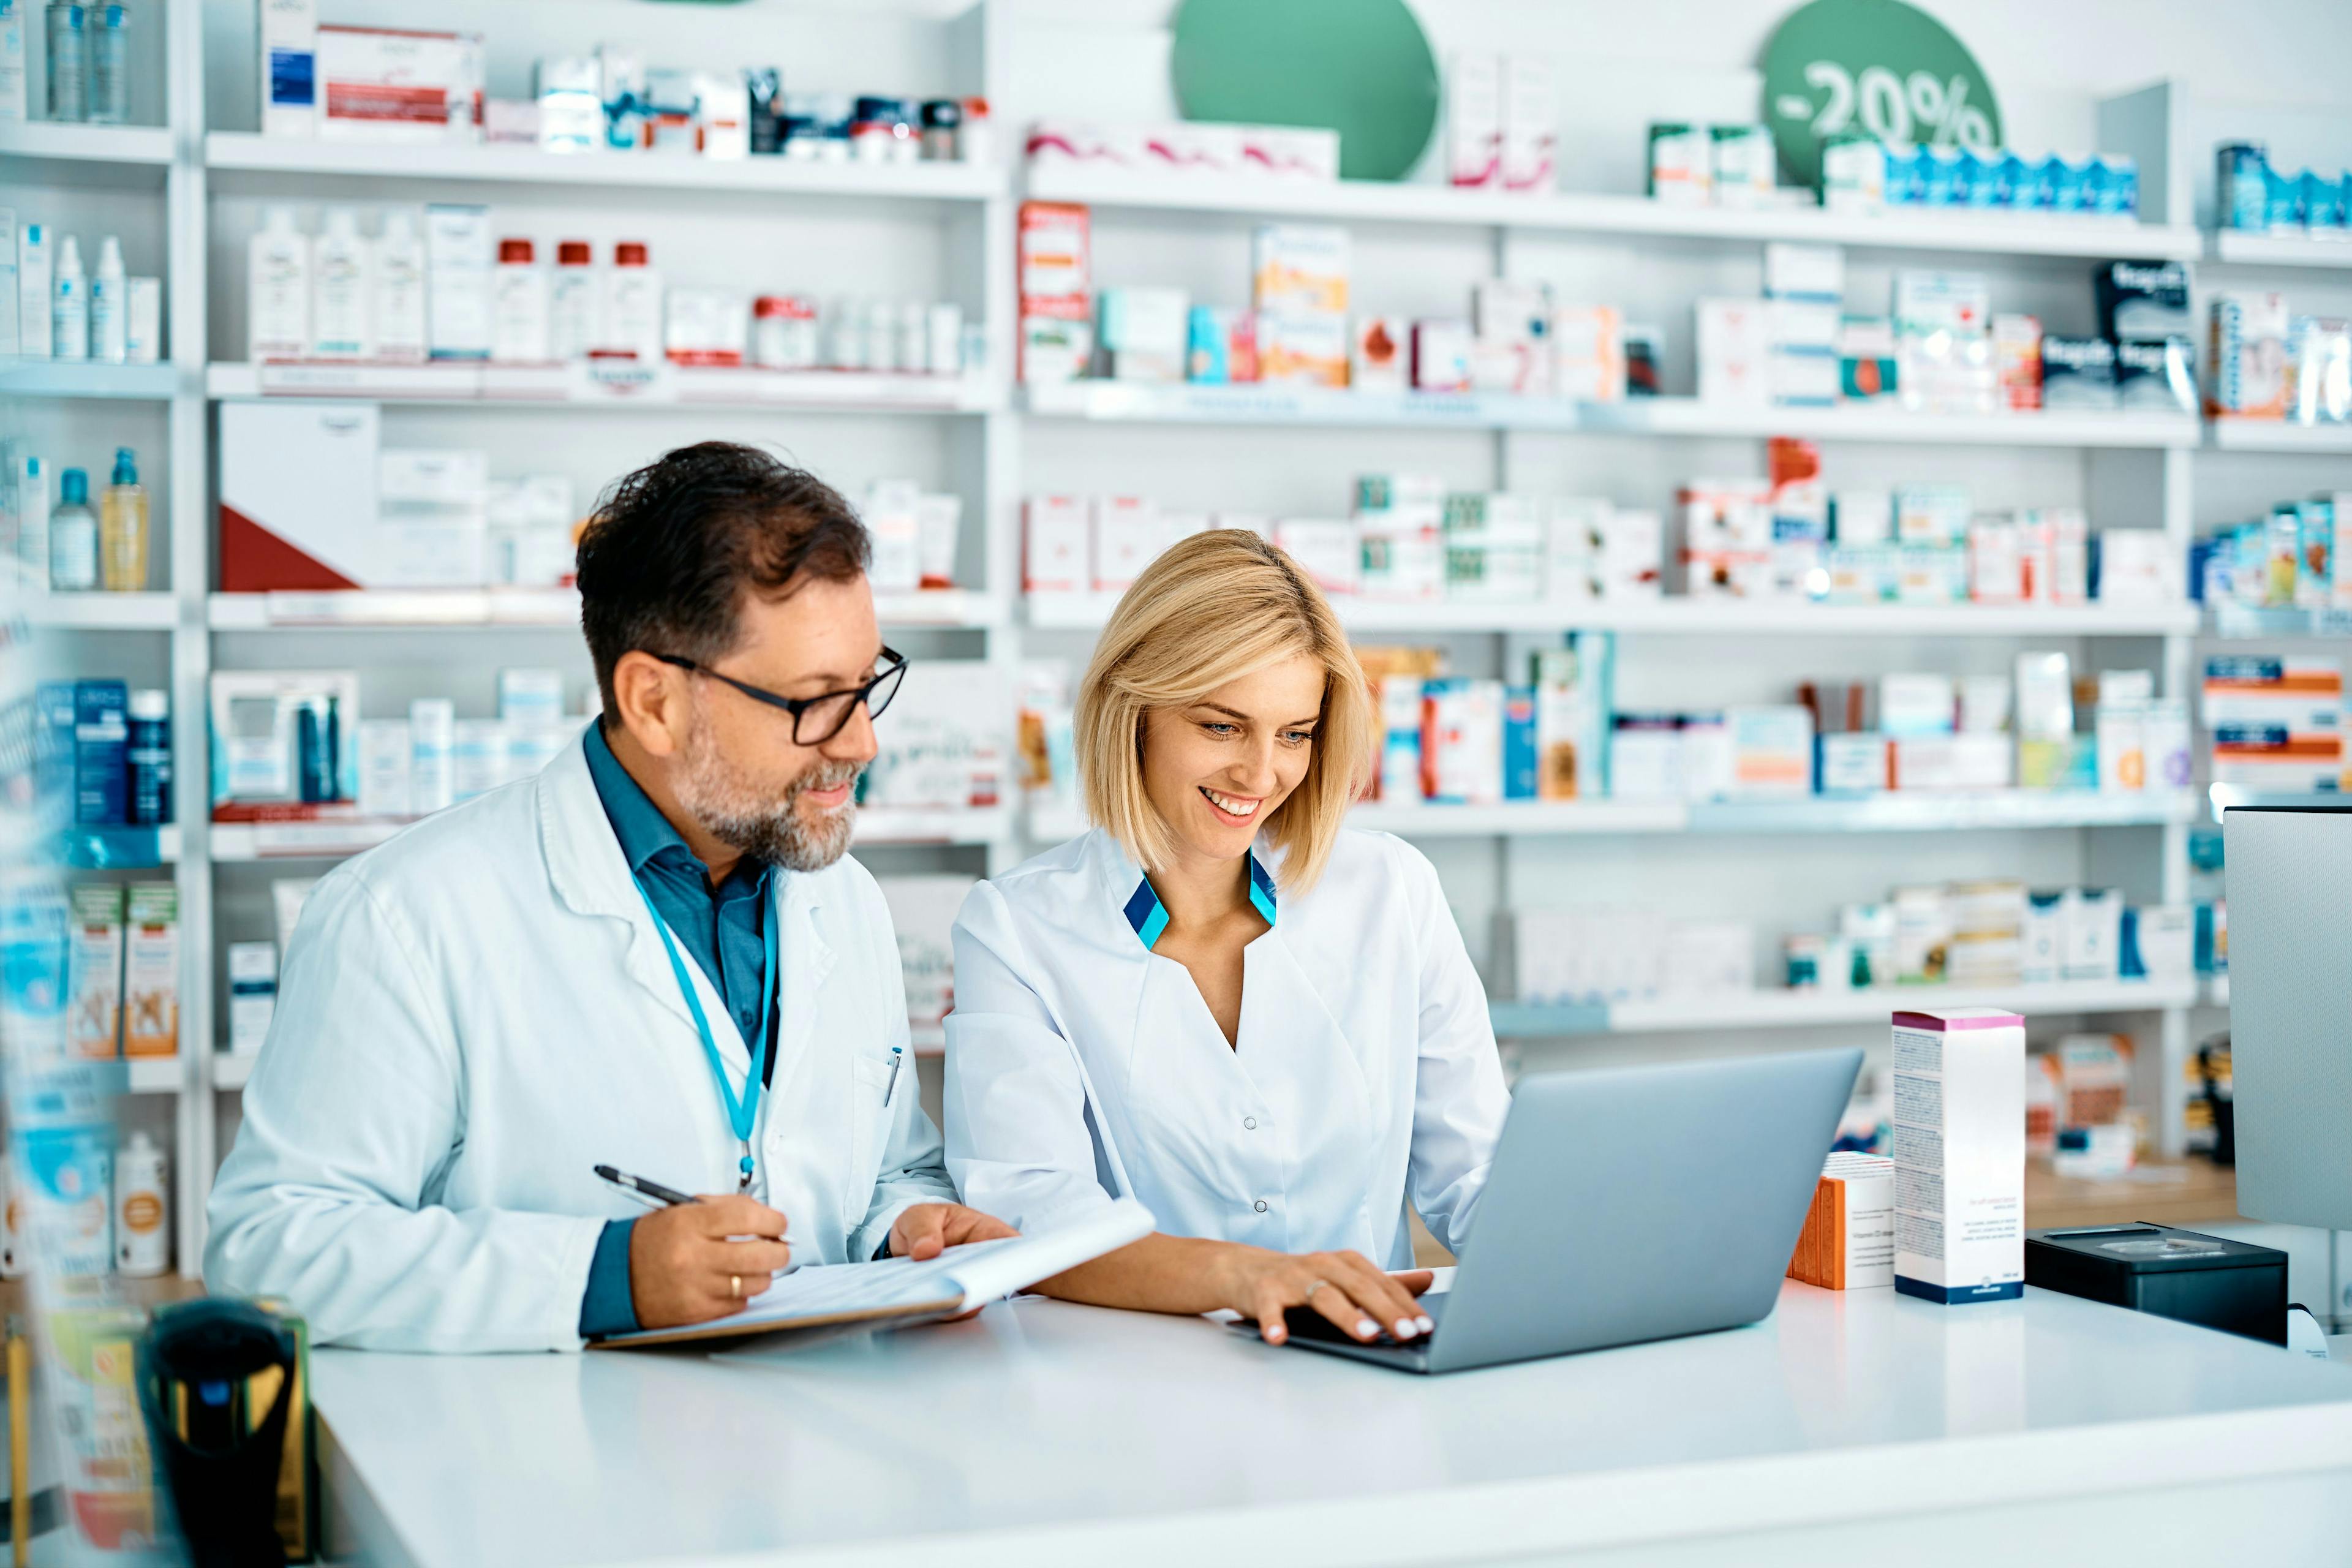 Happy pharmacist using laptop while her colleagues is taking notes in pharmacy. | Image Credit: Drazen - stock.adobe.com